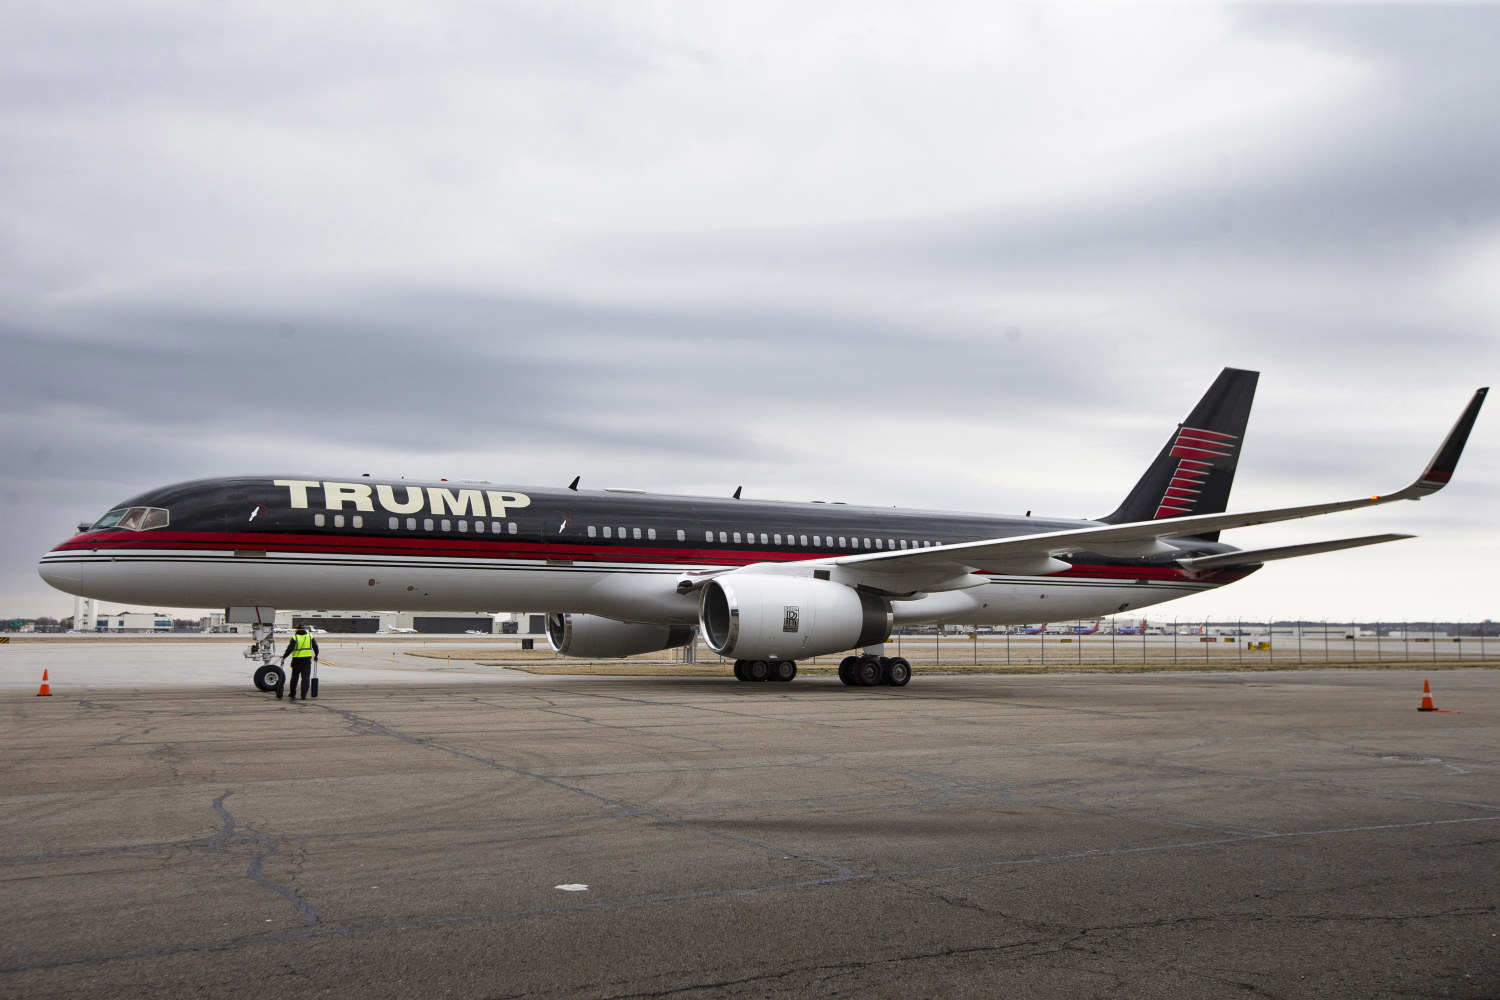 FILE - In this March 1, 2016 file photo, Republican presidential candidate Donald Trump's private jet arrives at Port-Columbus International Airport, in Columbus, Ohio. President Donald Trump's private jet, an instantly recognizable Boeing 757 used during his campaign, was caught up in a quintessential New York City traffic mishap at LaGuardia Airport on Wednesday, Nov. 28, 2018: a fender bender while someone else was trying to park. A corporate jet maneuvering into a parking spot clipped the wing of Trump's parked plane around 8:30 a.m., Trump's company, The Trump Organization, confirmed. (AP Photo/John Minchillo, File)